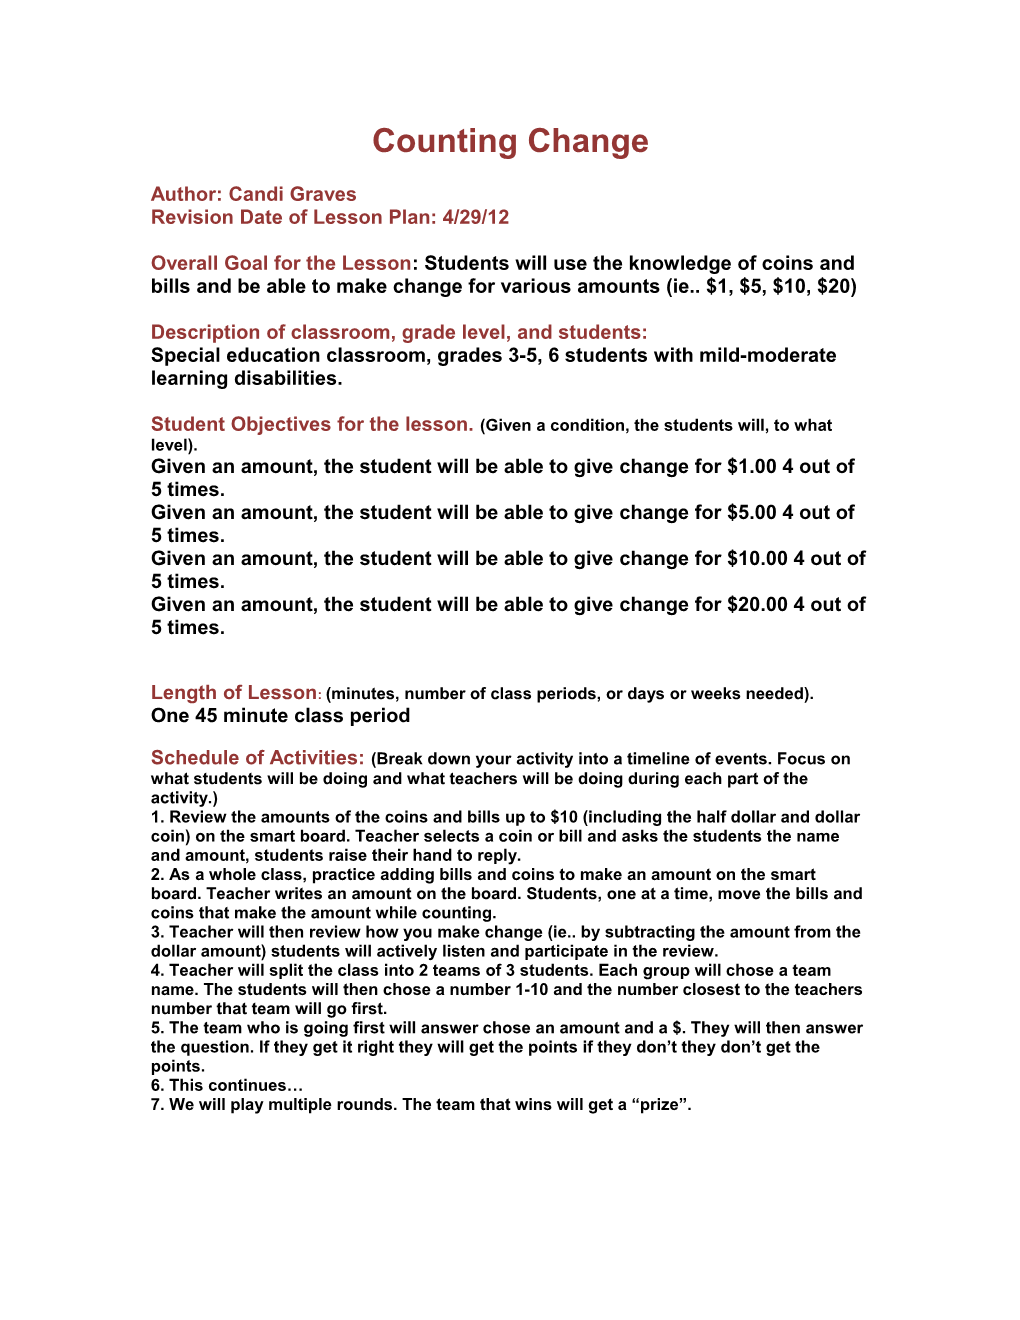 W301 Lesson Plan Template s1